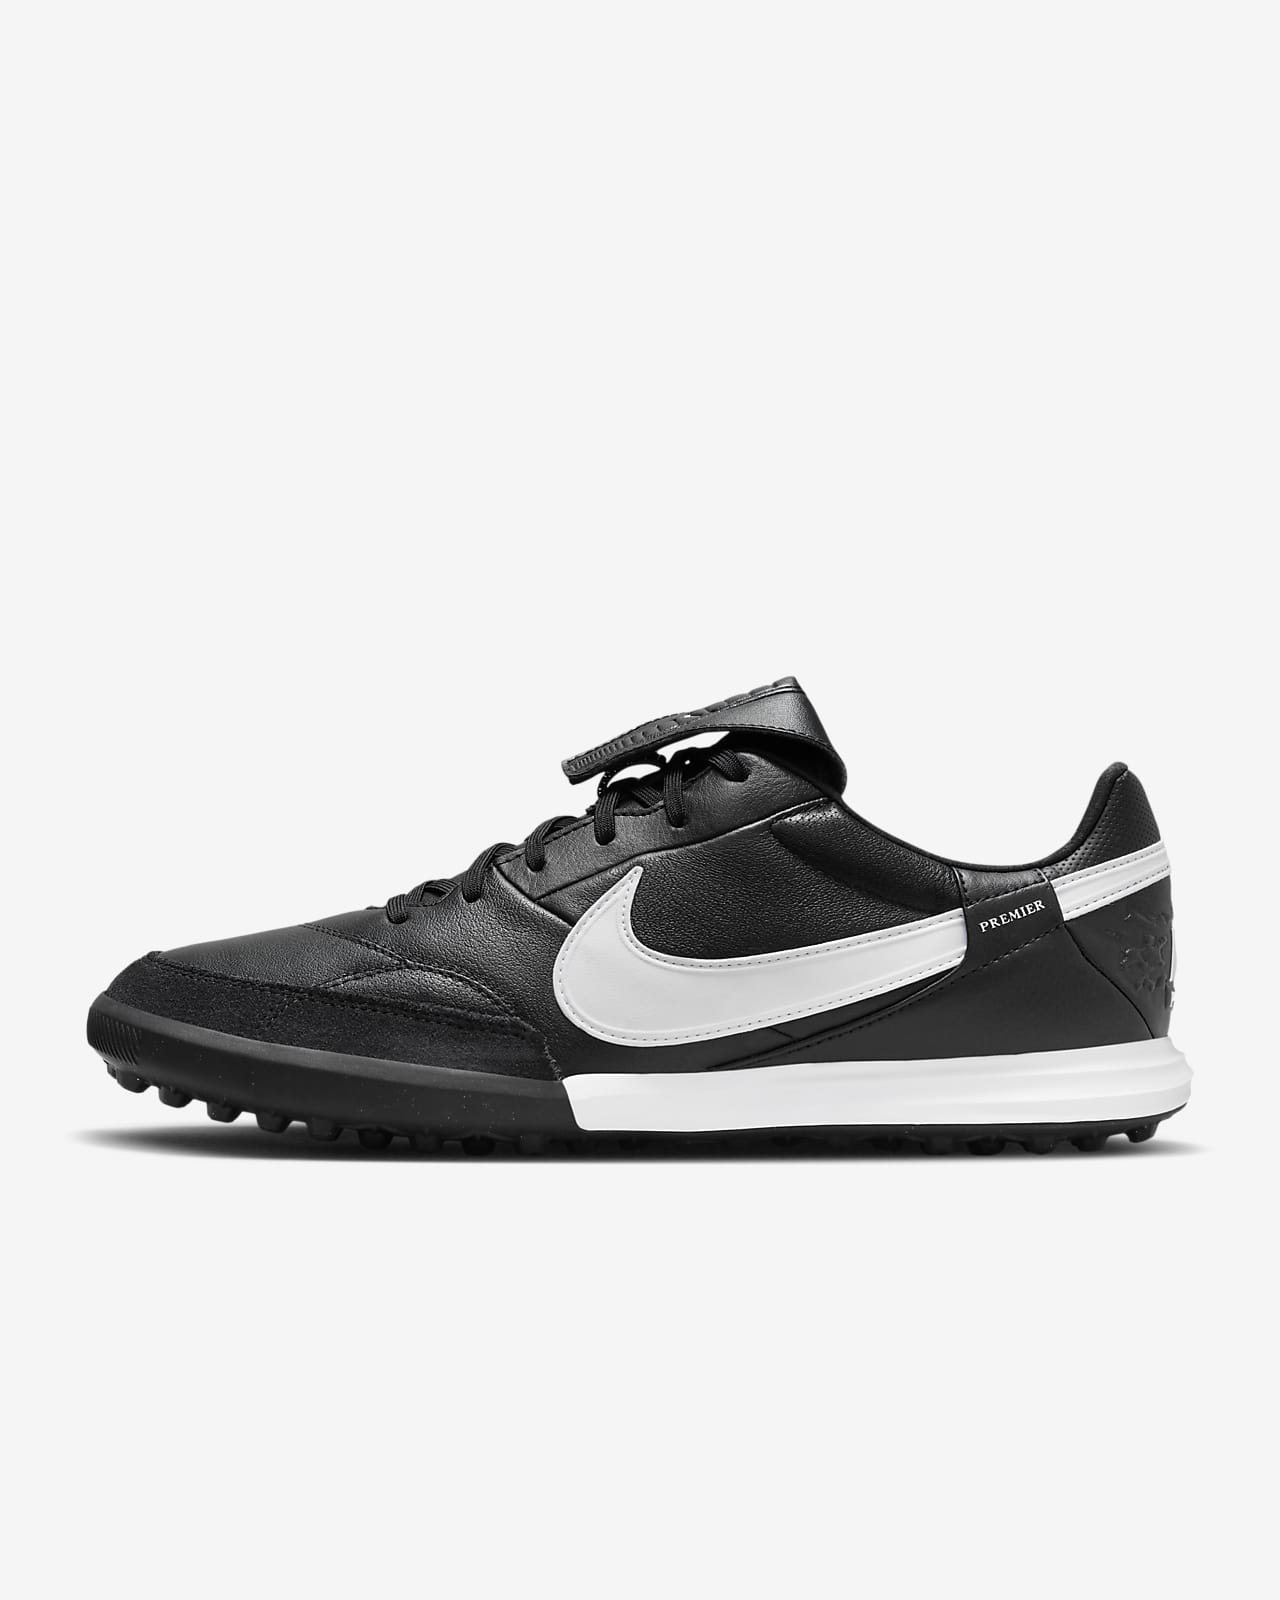 Nike Premier 3 TF Low-Top Soccer Shoes